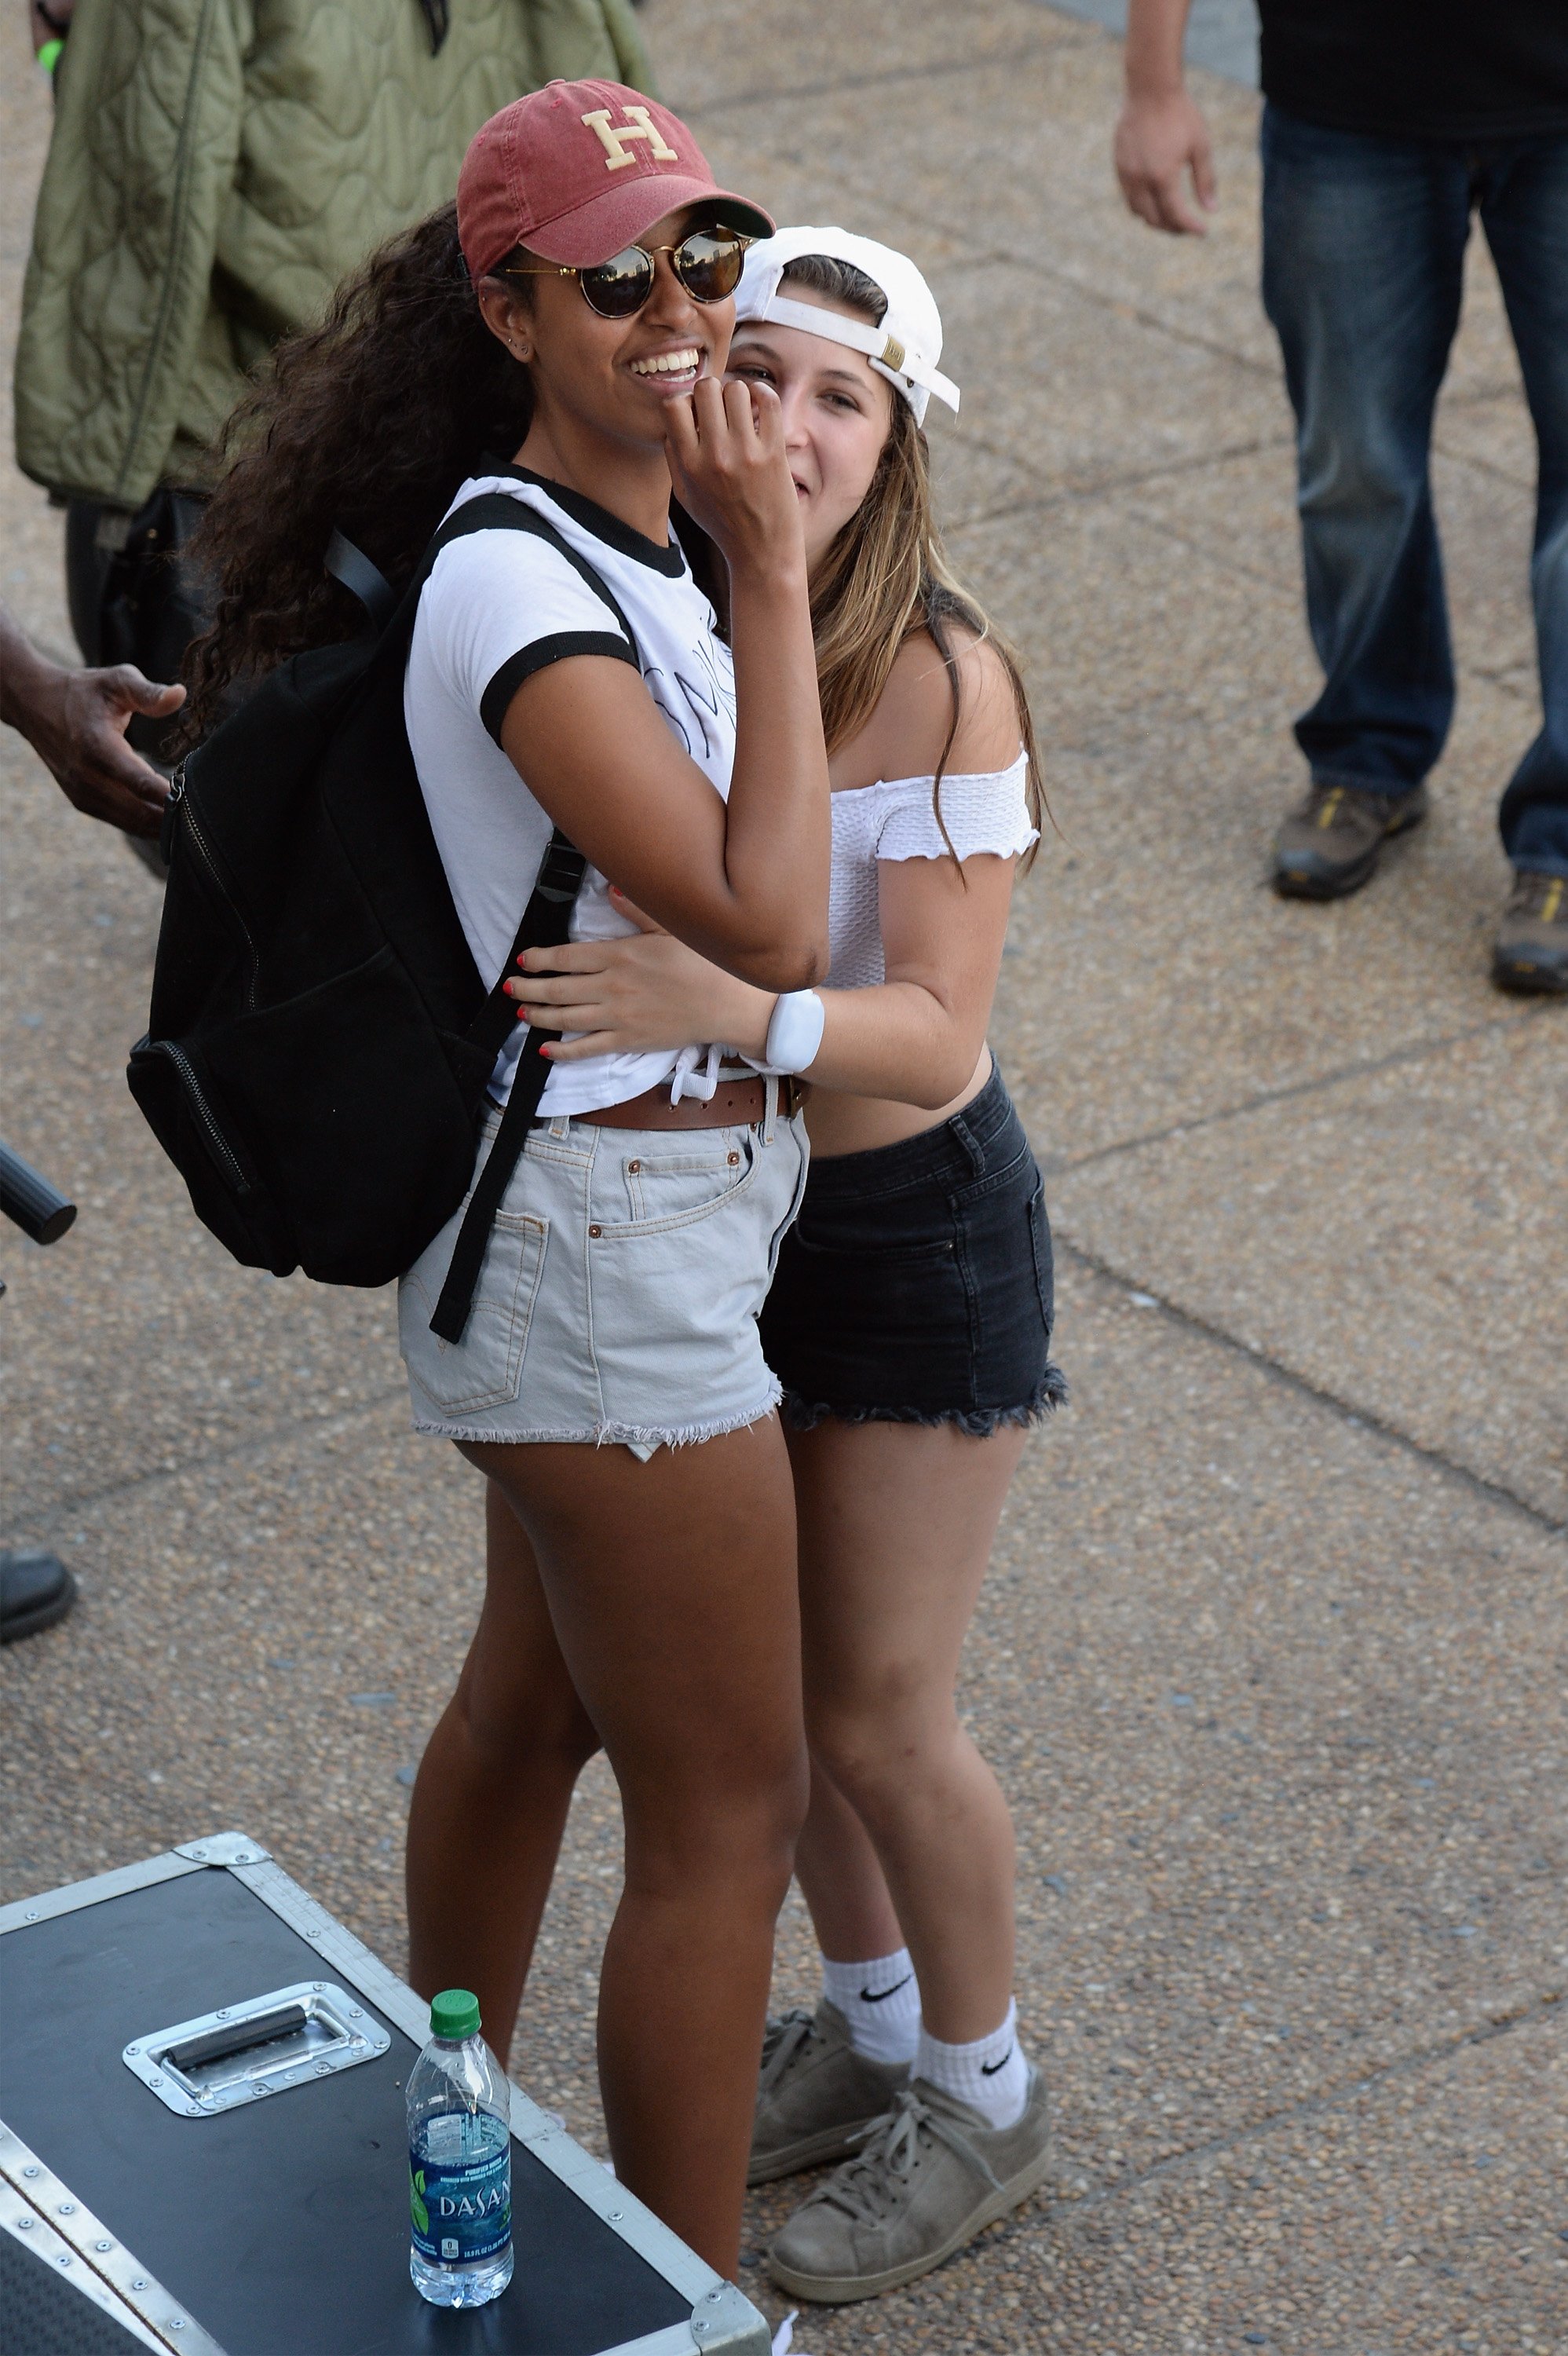 Malia Obama and a friend at the 2016 Budweiser Made in America Festival in Philadelphia, Pennsylvania | Photo: Getty Images